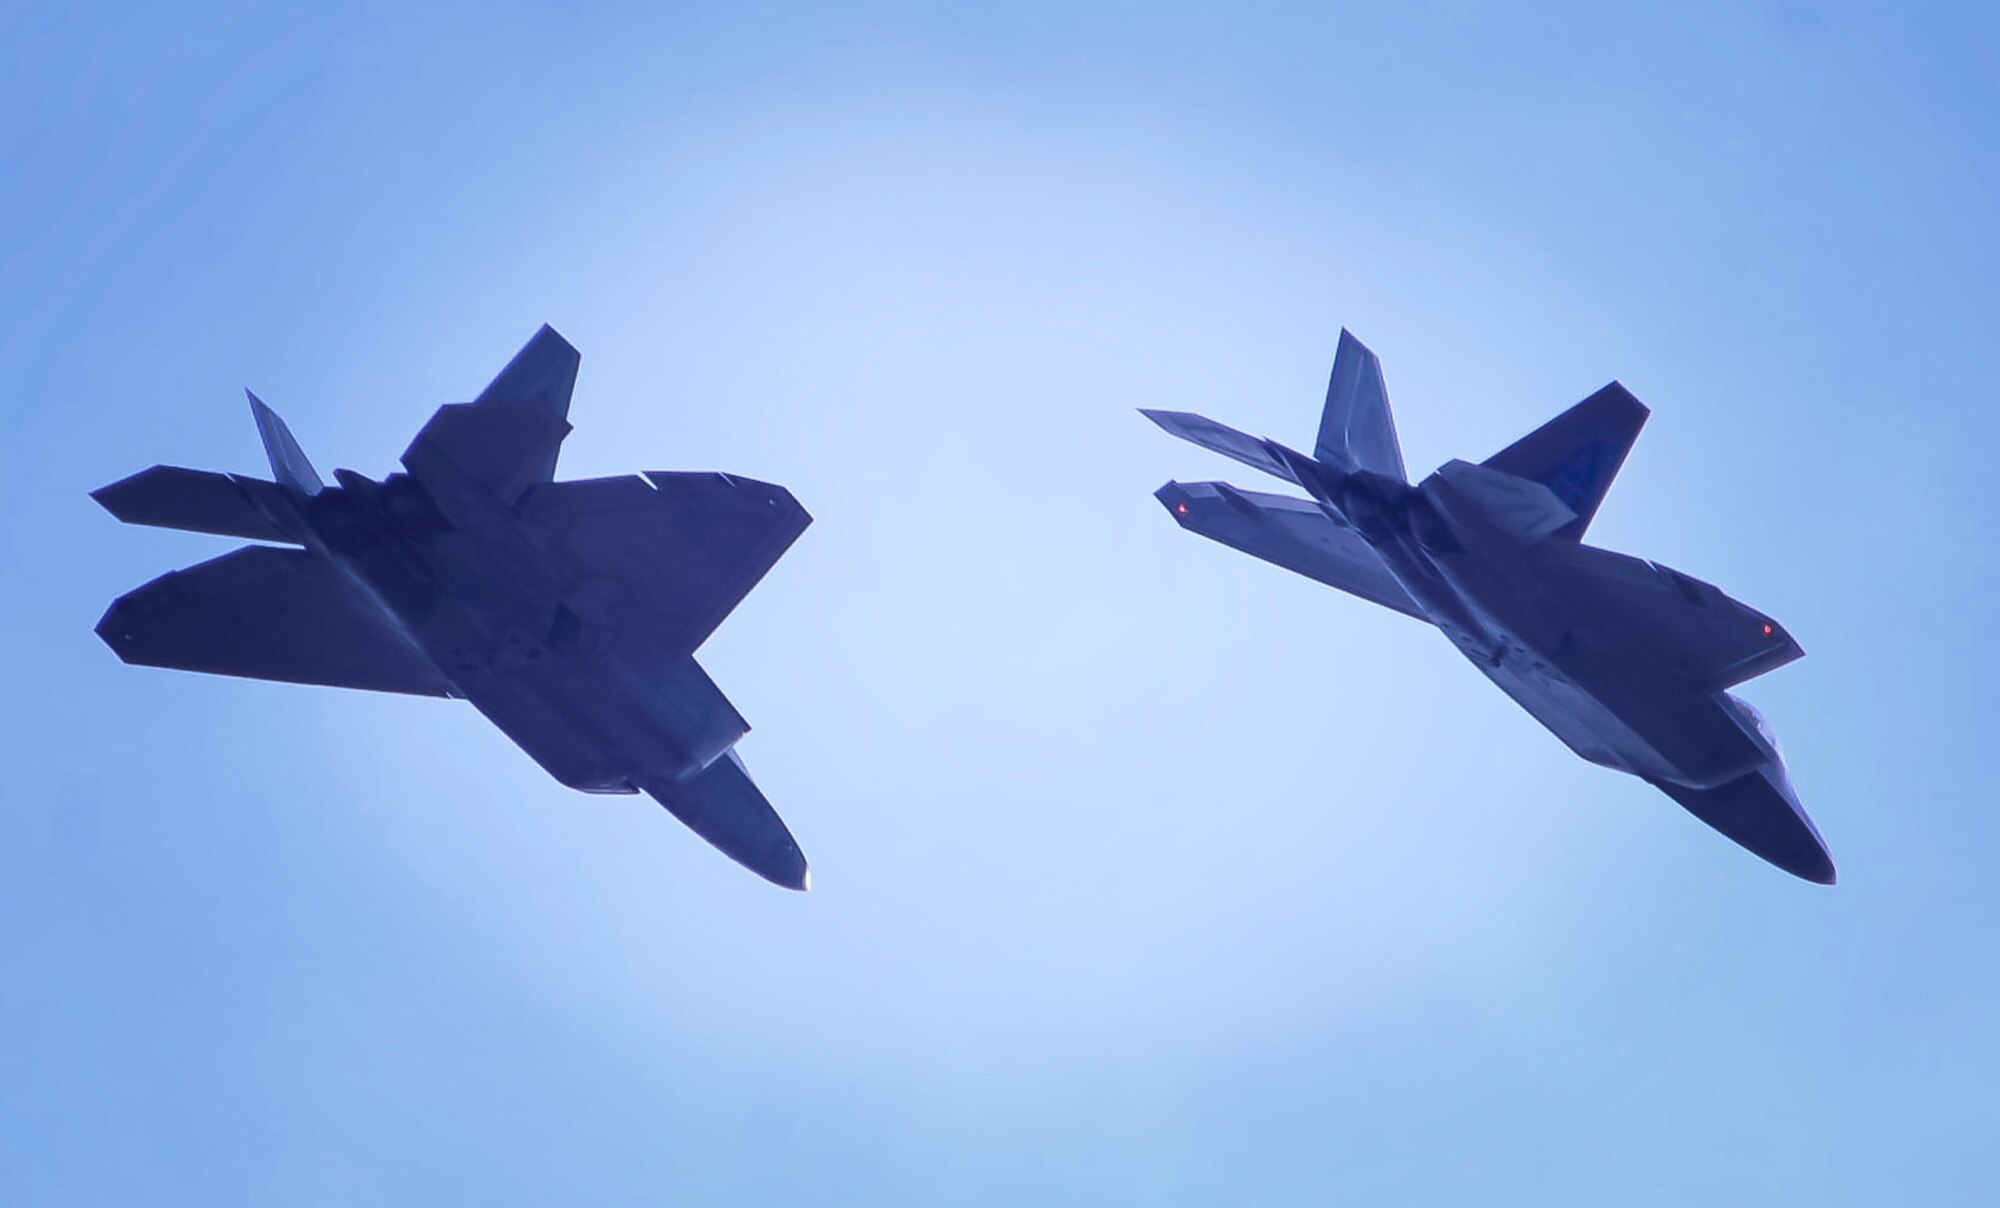 Two F-22 Raptors assigned to the 1st Fighter Wing, Joint Base Langley-Eustis, Va., break to land on Nellis Air Force Base, Nev., before Red Flag 17-1, Jan. 18, 2017. Red Flag is a realistic combat training exercise involving the air, space and cyber forces of the U.S. and its allies. (U.S. Air Force photo by Airman 1st Class Kevin Tanenbaum/Released) 